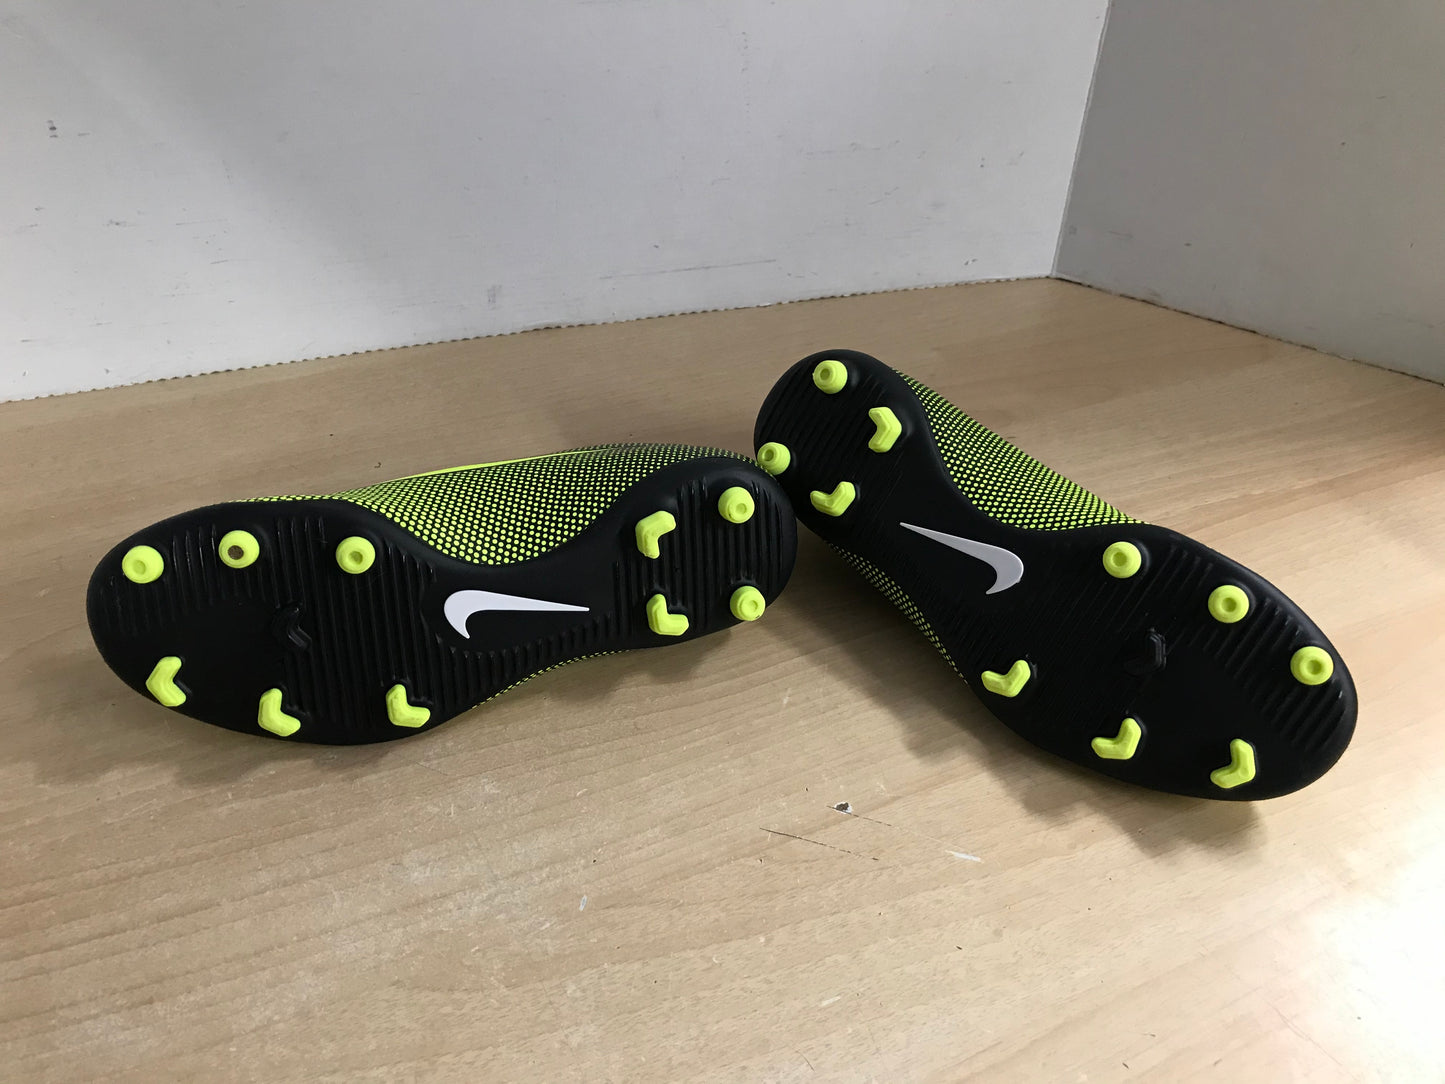 Soccer Shoes Cleats Child Size 6 Nike Lime Black New Demo Model